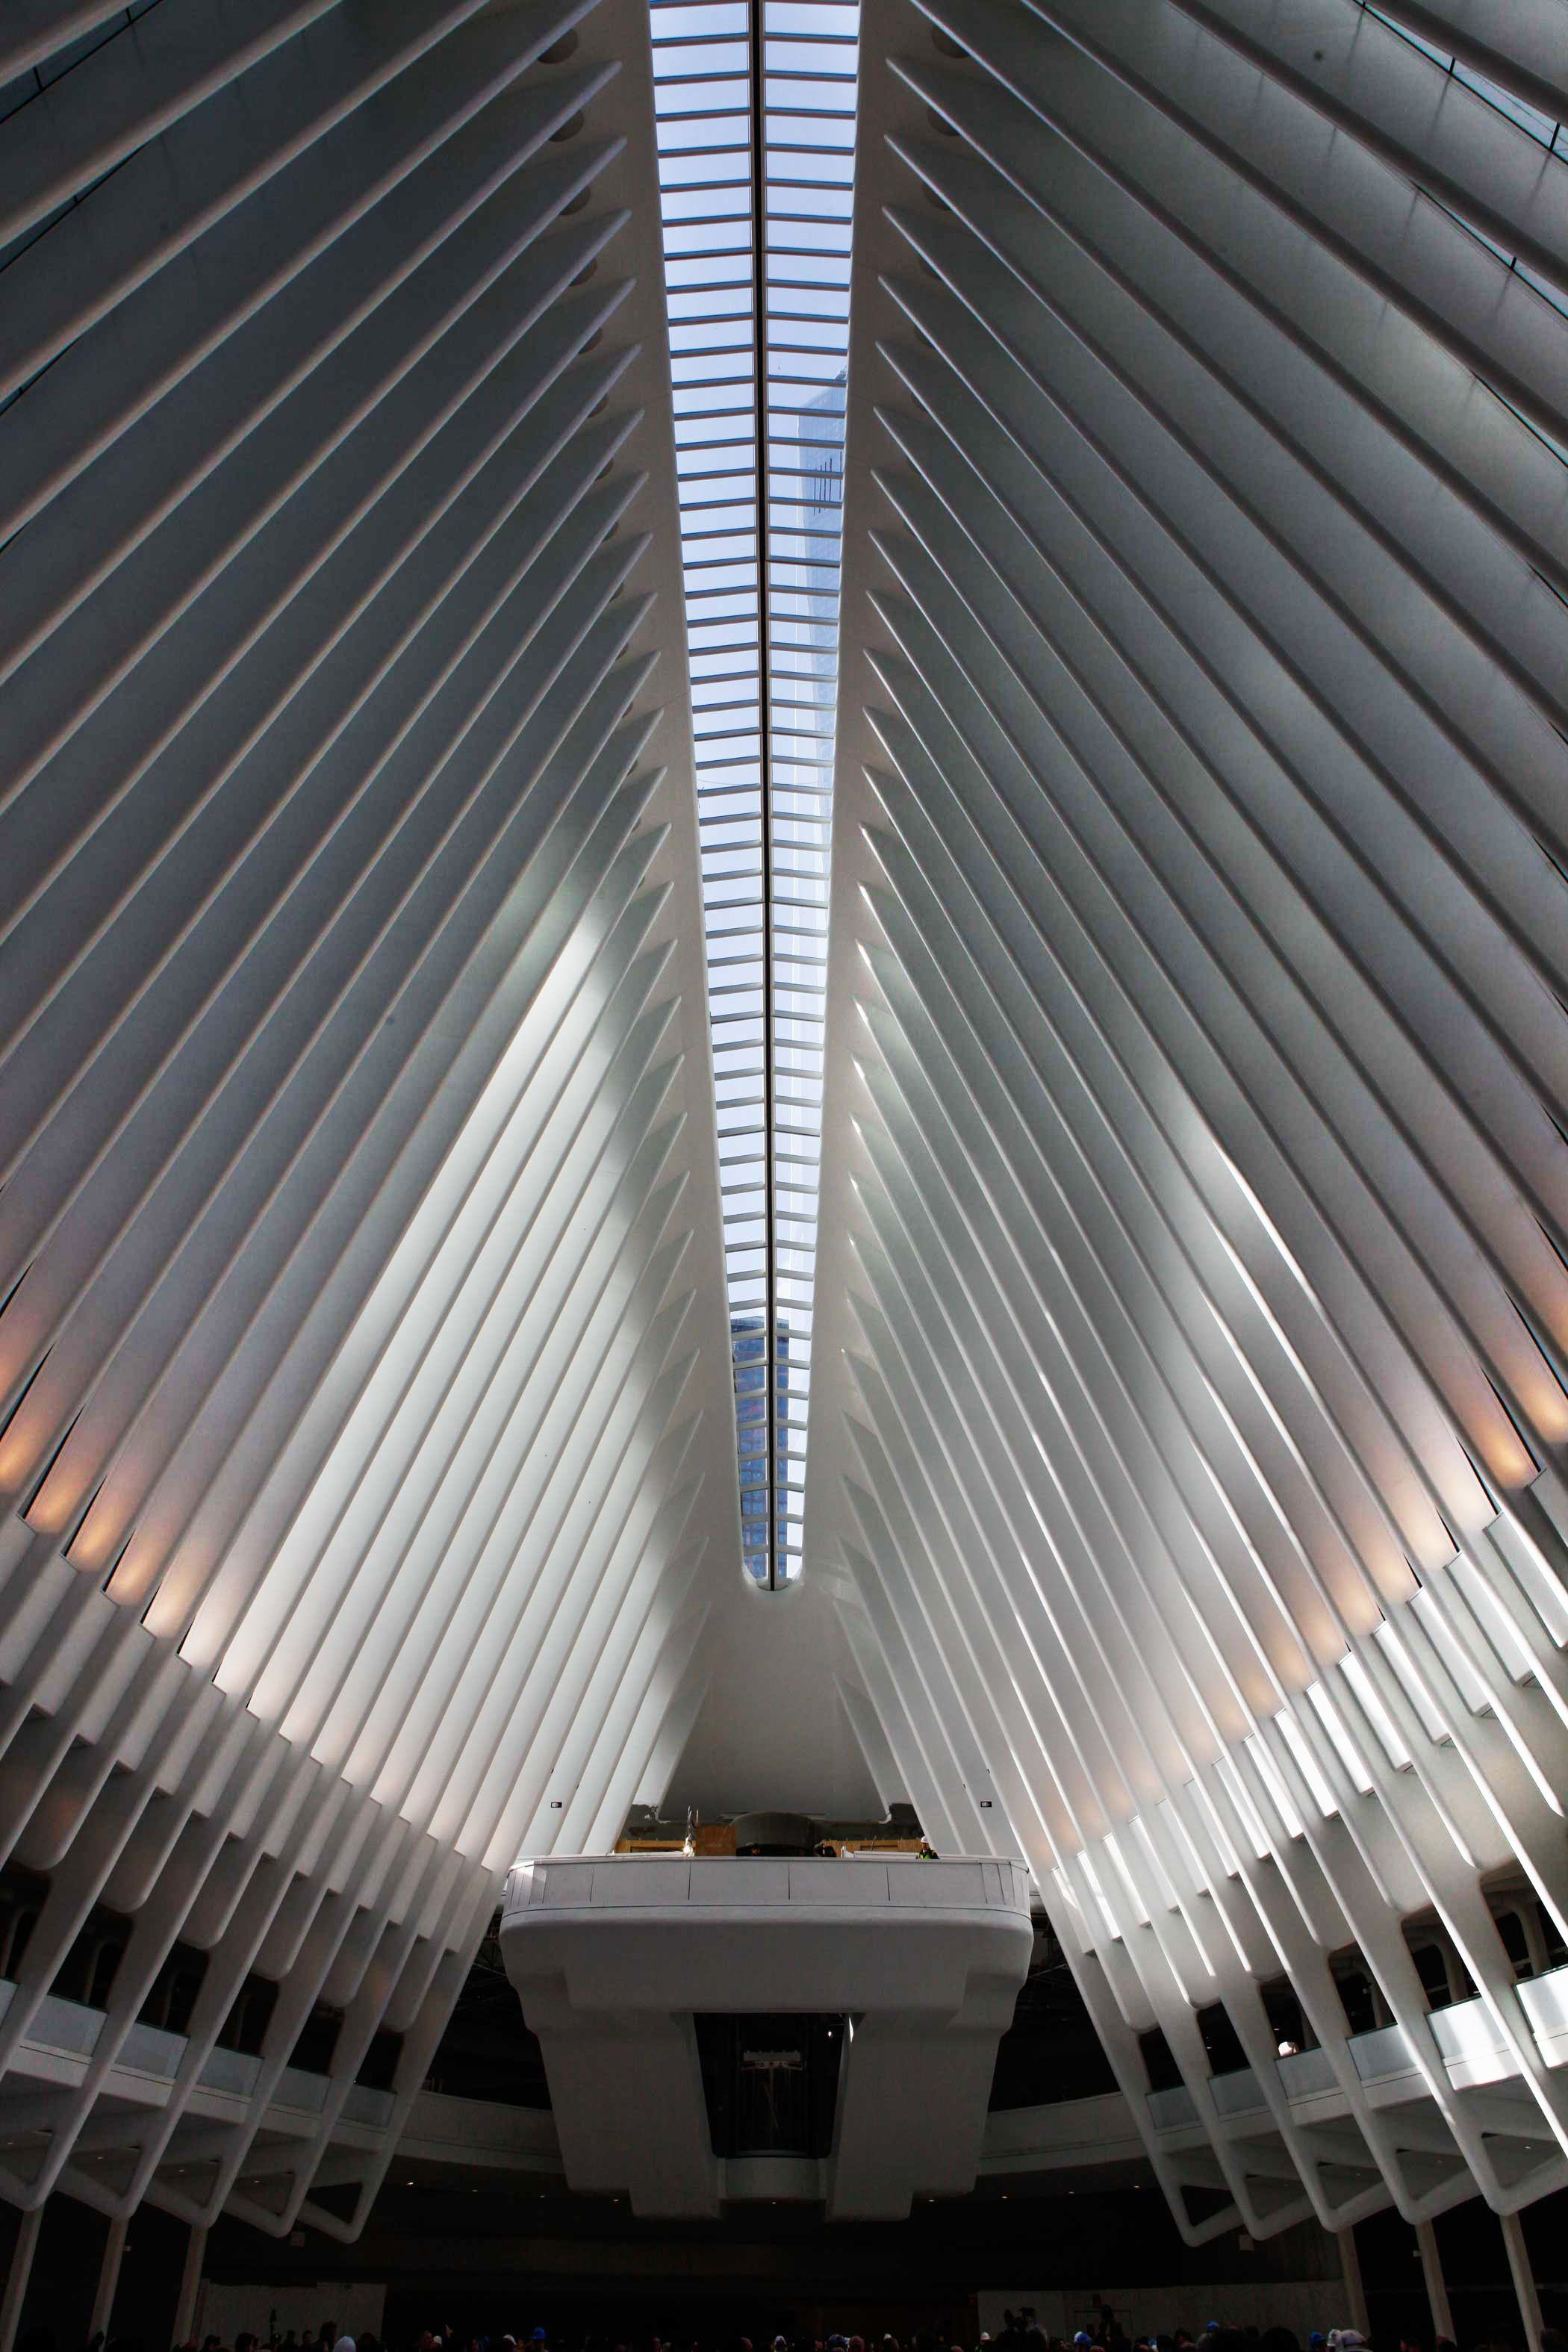 The roof of the Oculus structure of the World Trade Center Transportation Hub in New York on Mar. 3, 2016.